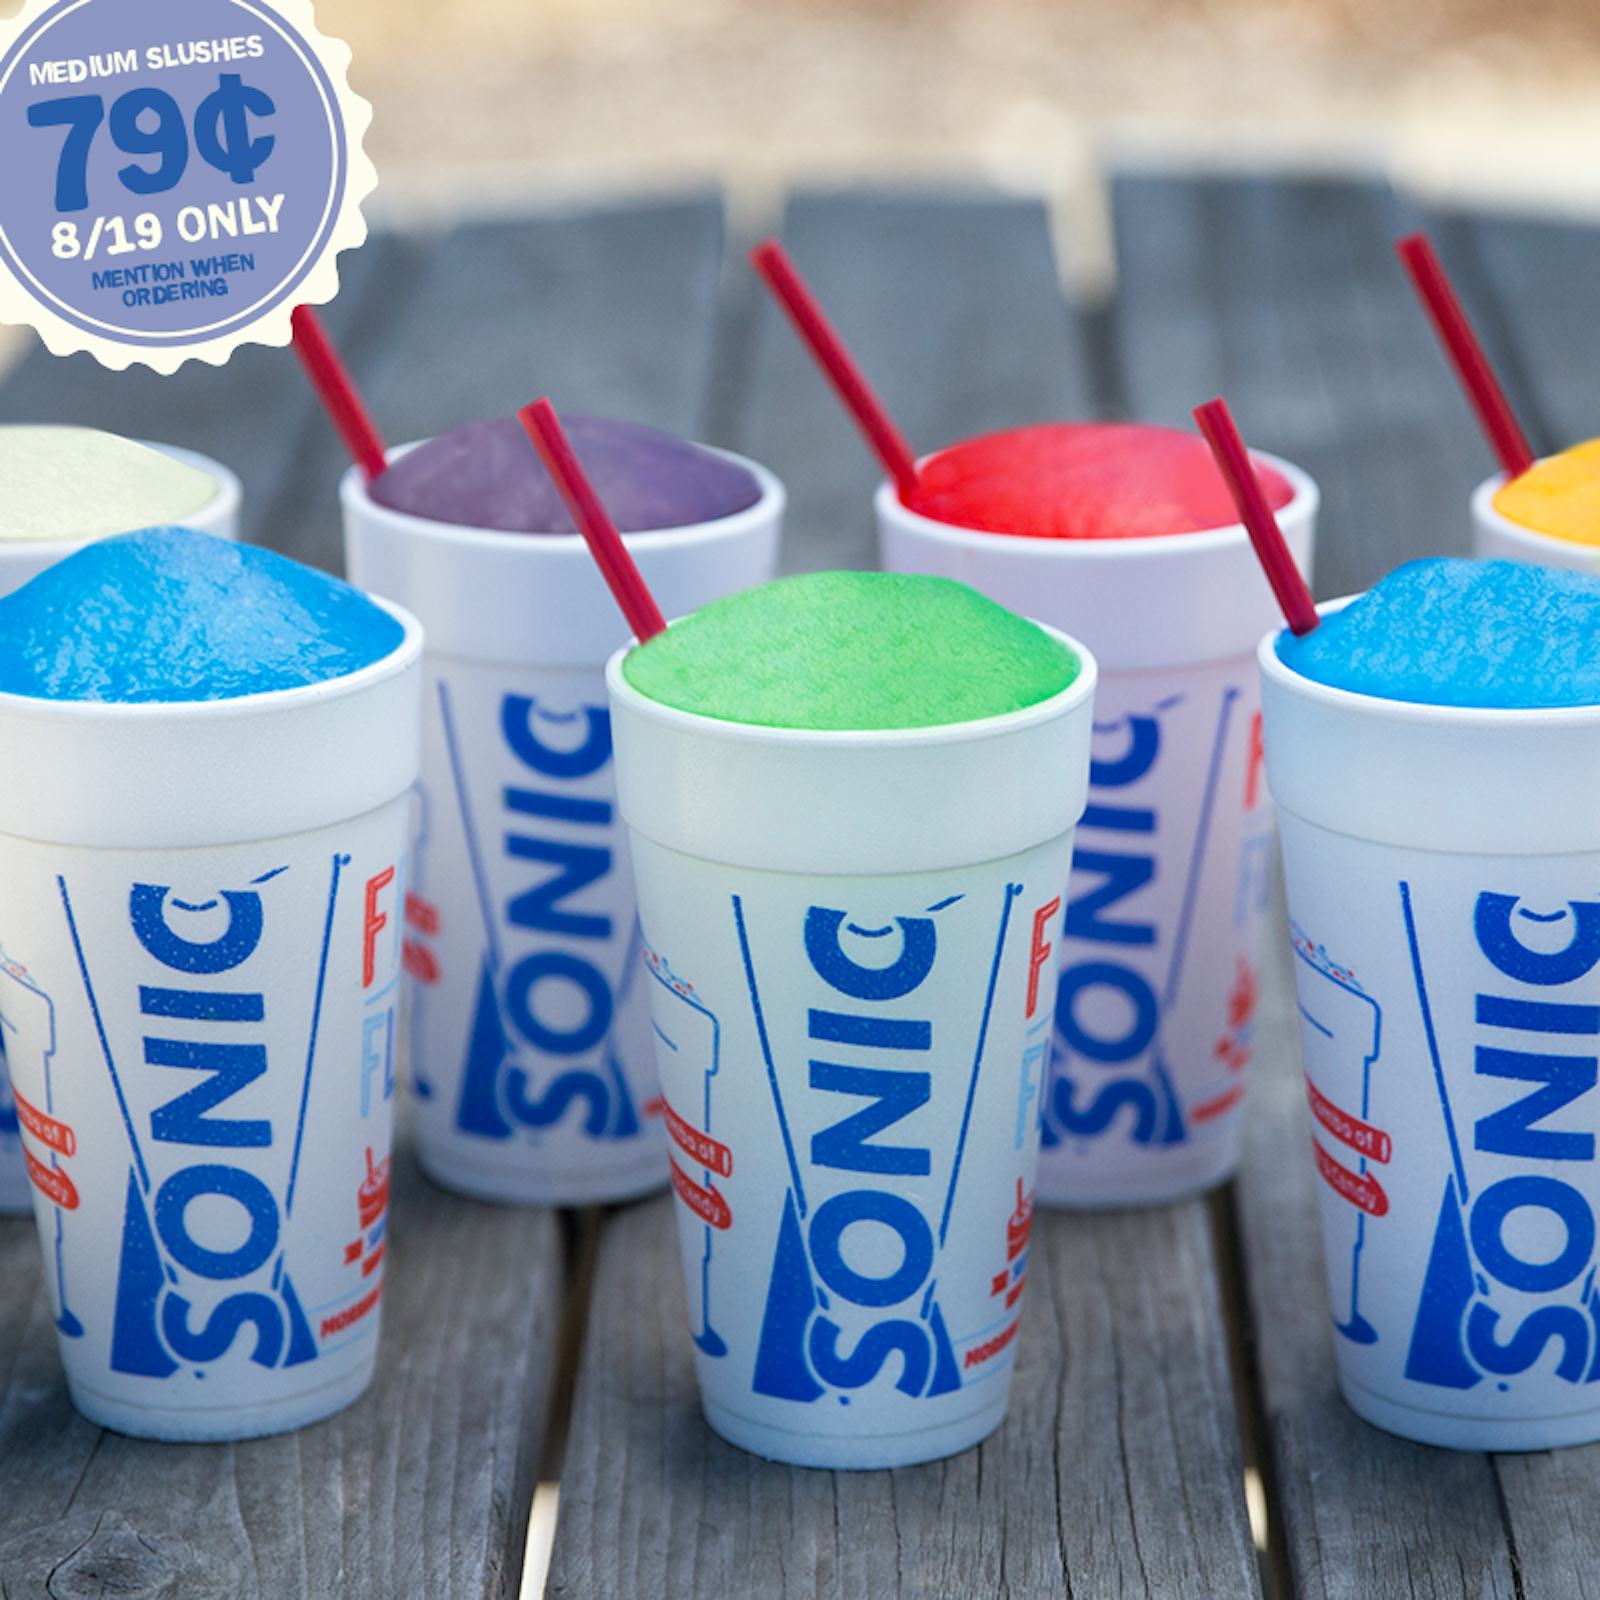 Sonic Slushes Are 79 Cents On August 19, So Let's All Turn Our Tongues